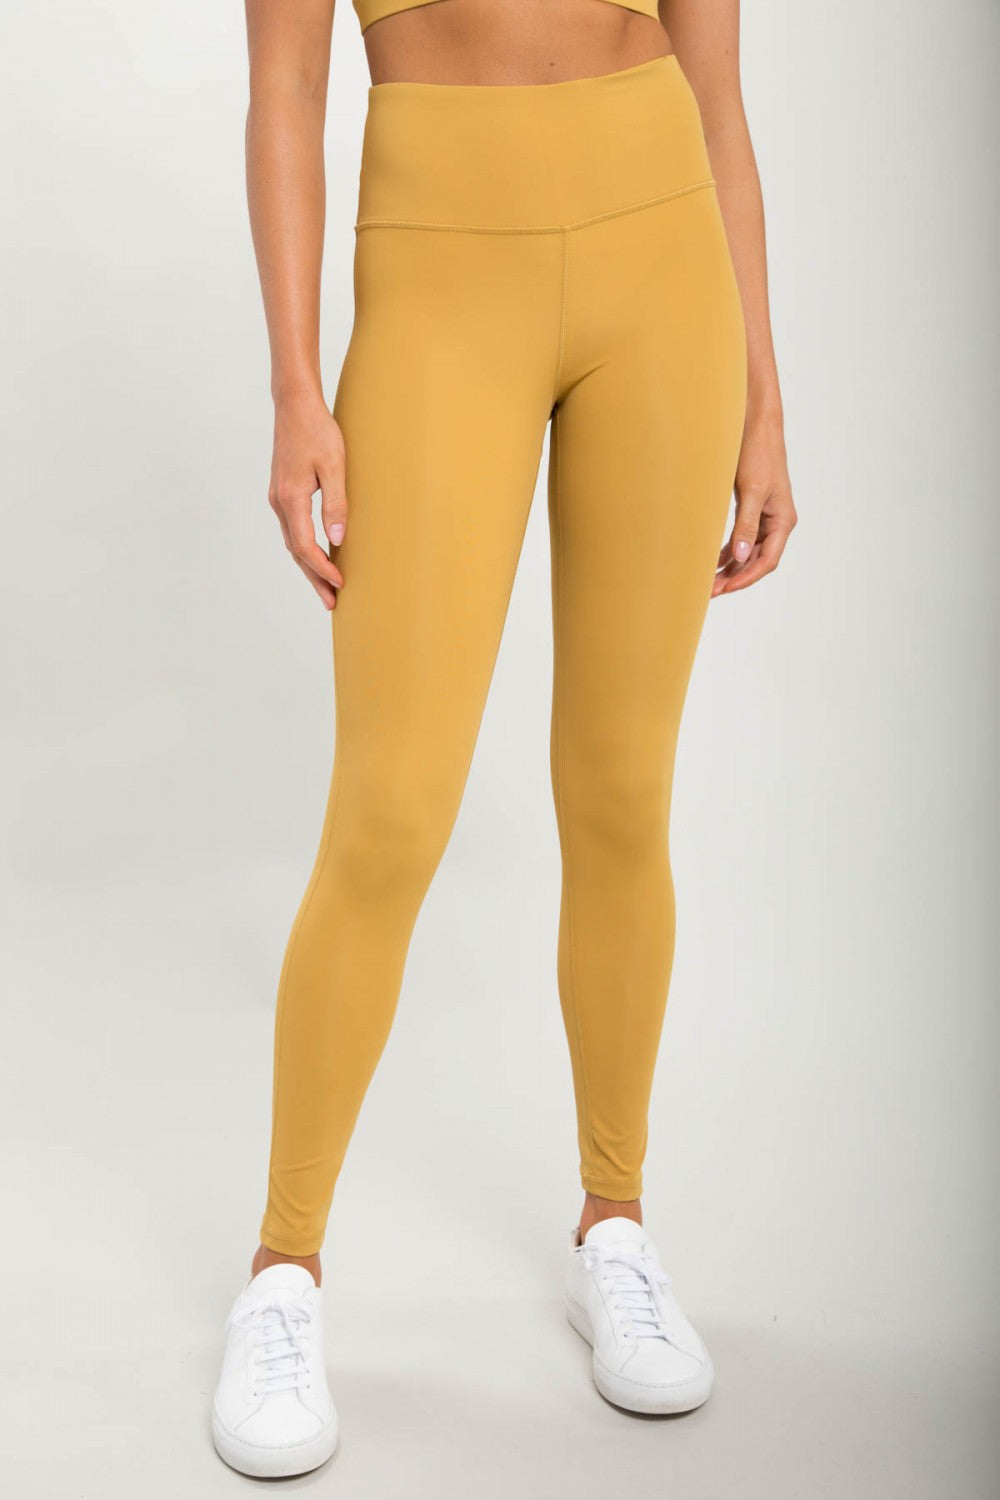 H.WST LEGGINGS - APH8026 – The Sports Center